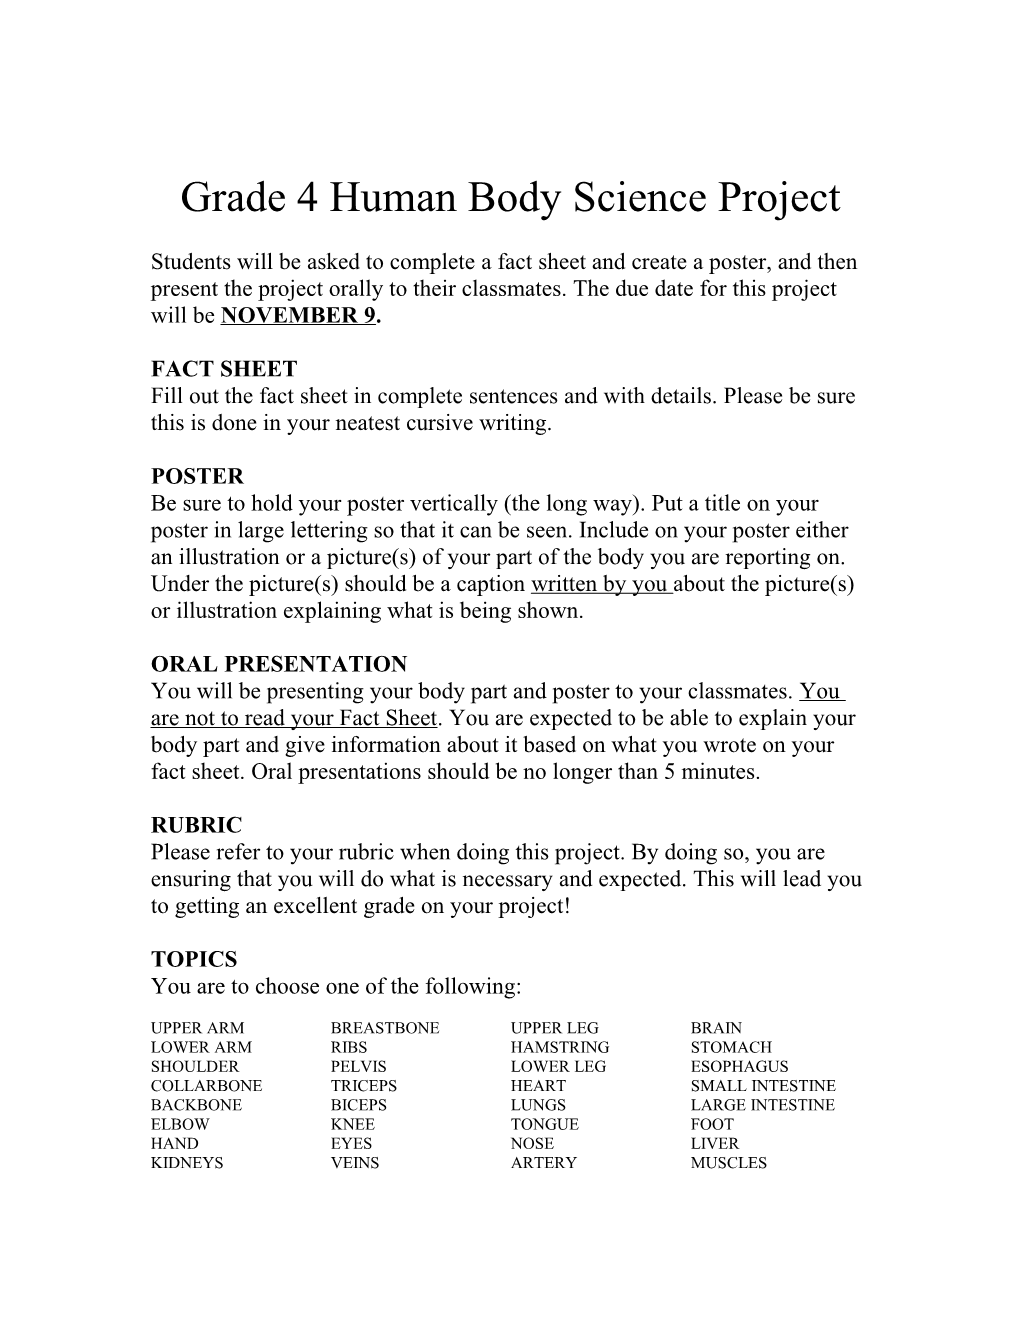 Grade 4 Human Body Science Project